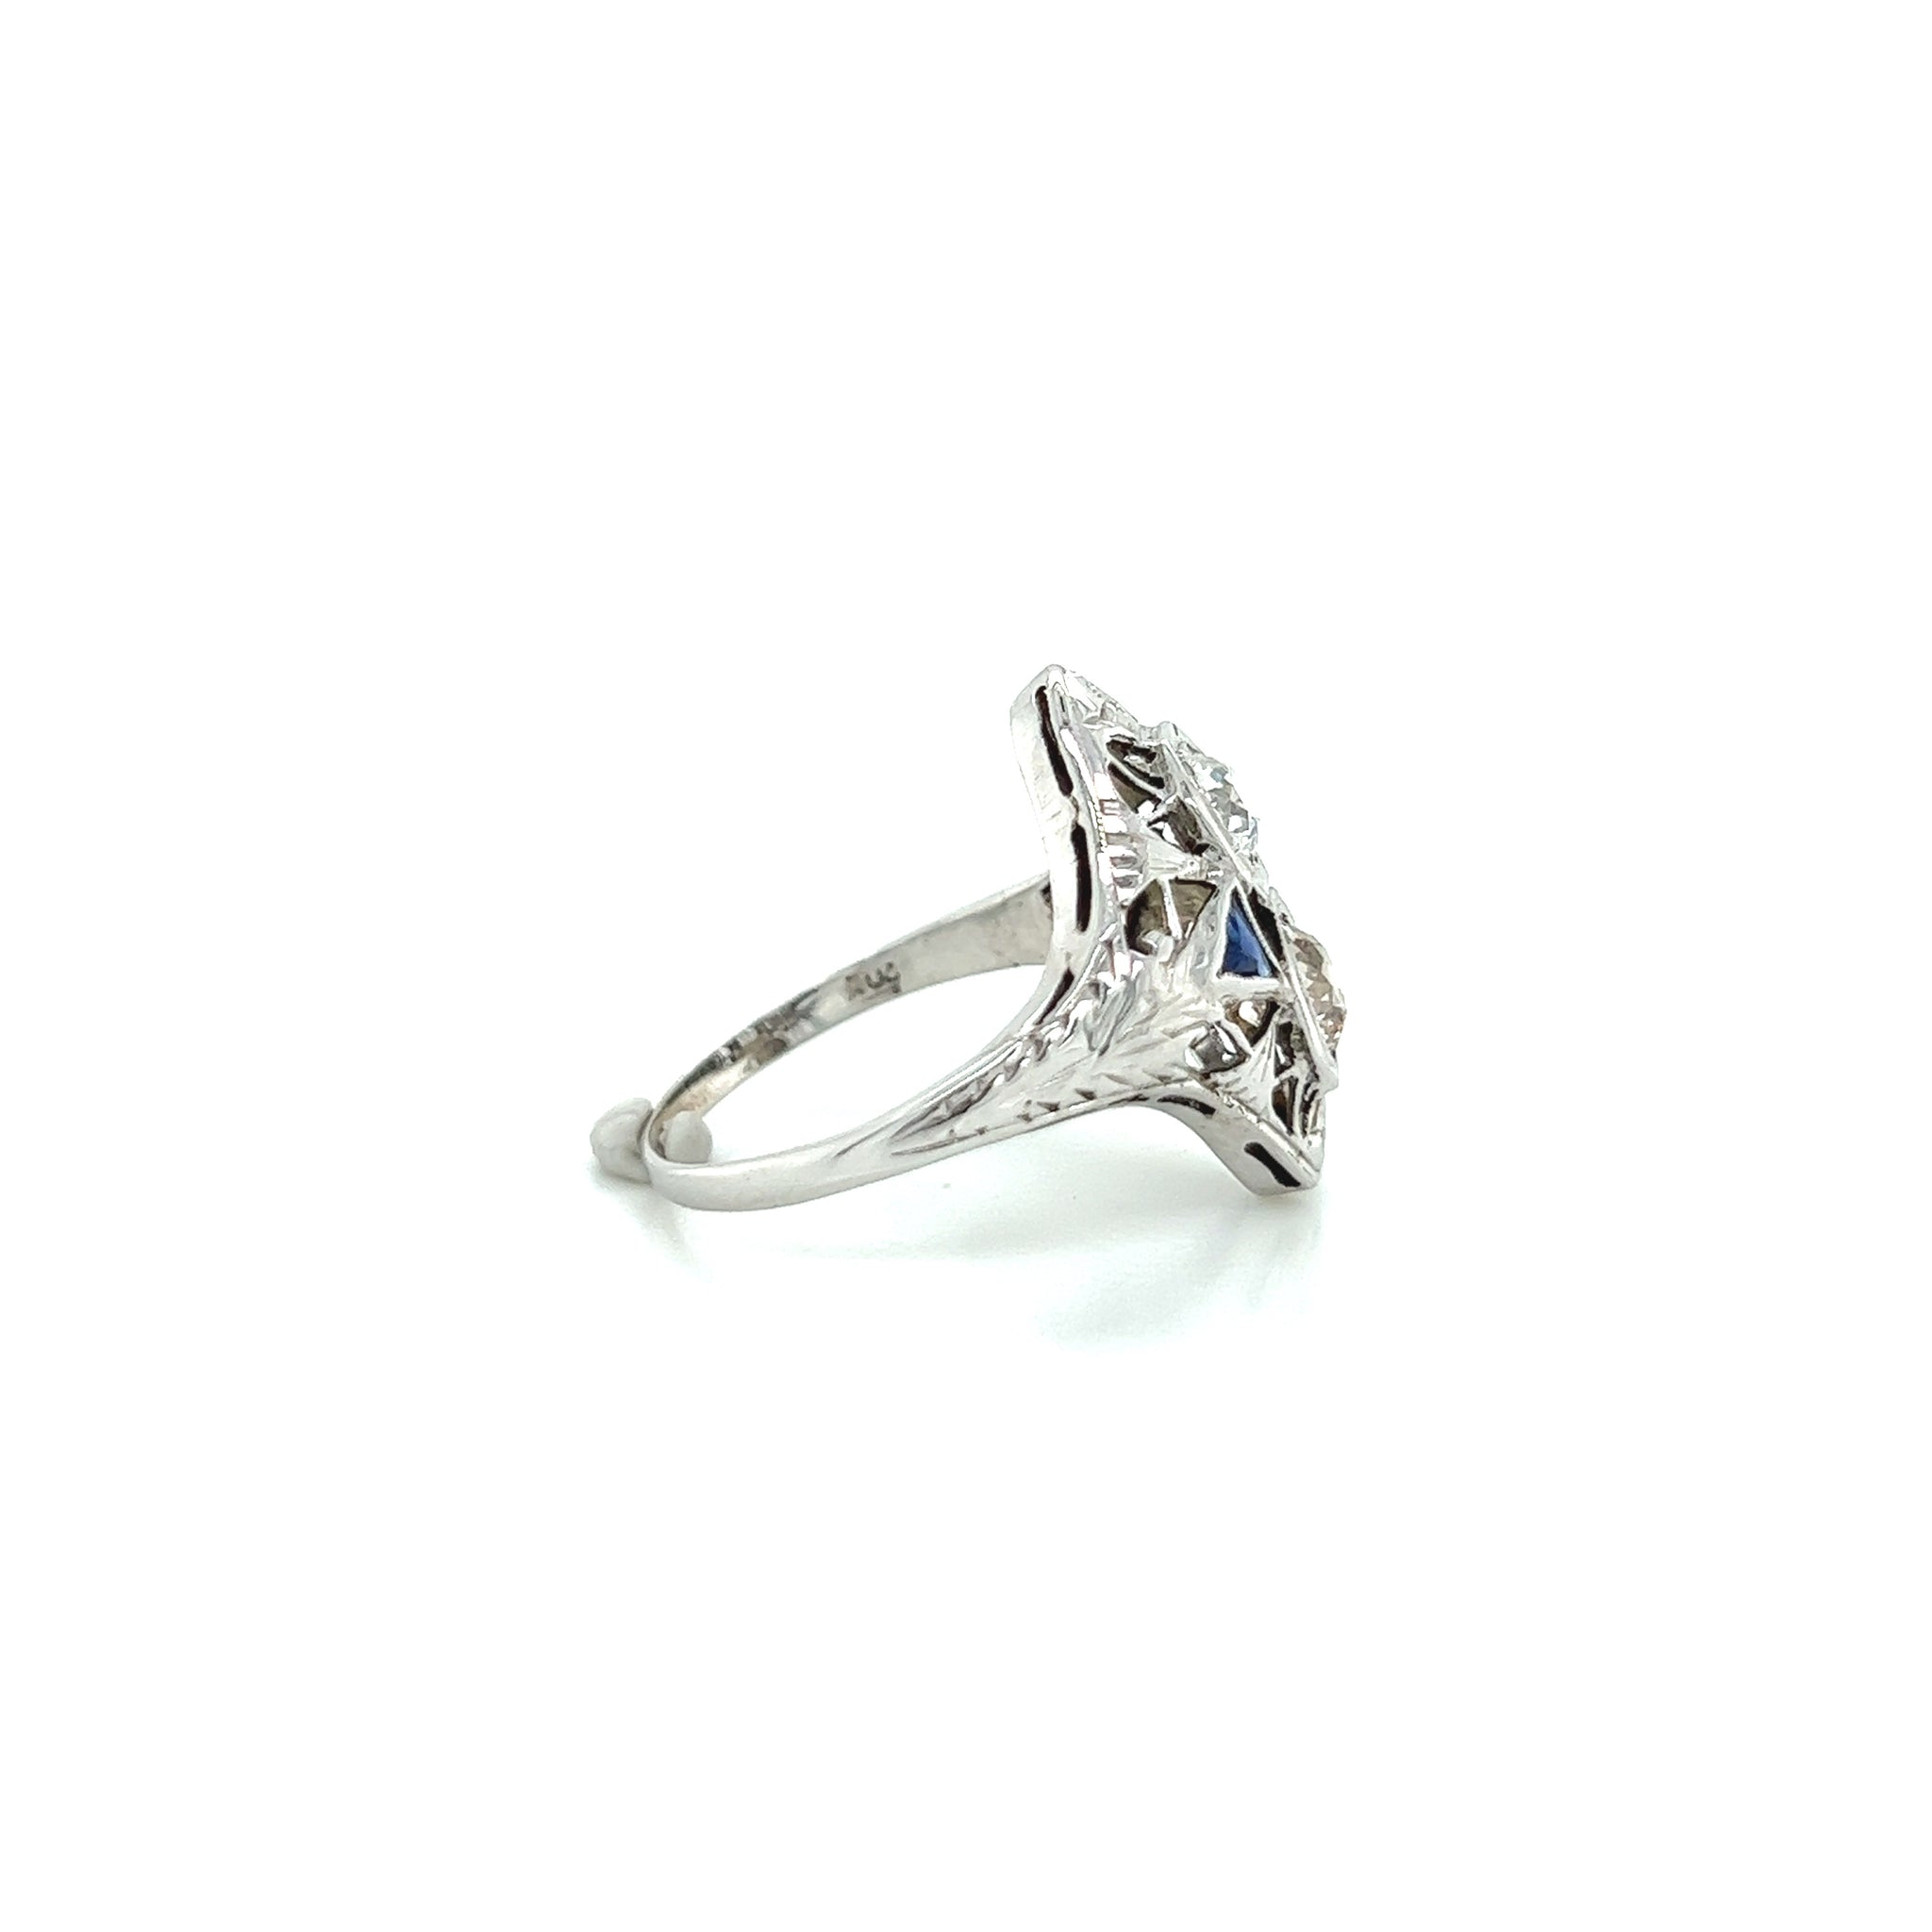 Ring in 18K (750) white gold, set with calibrated diamon…